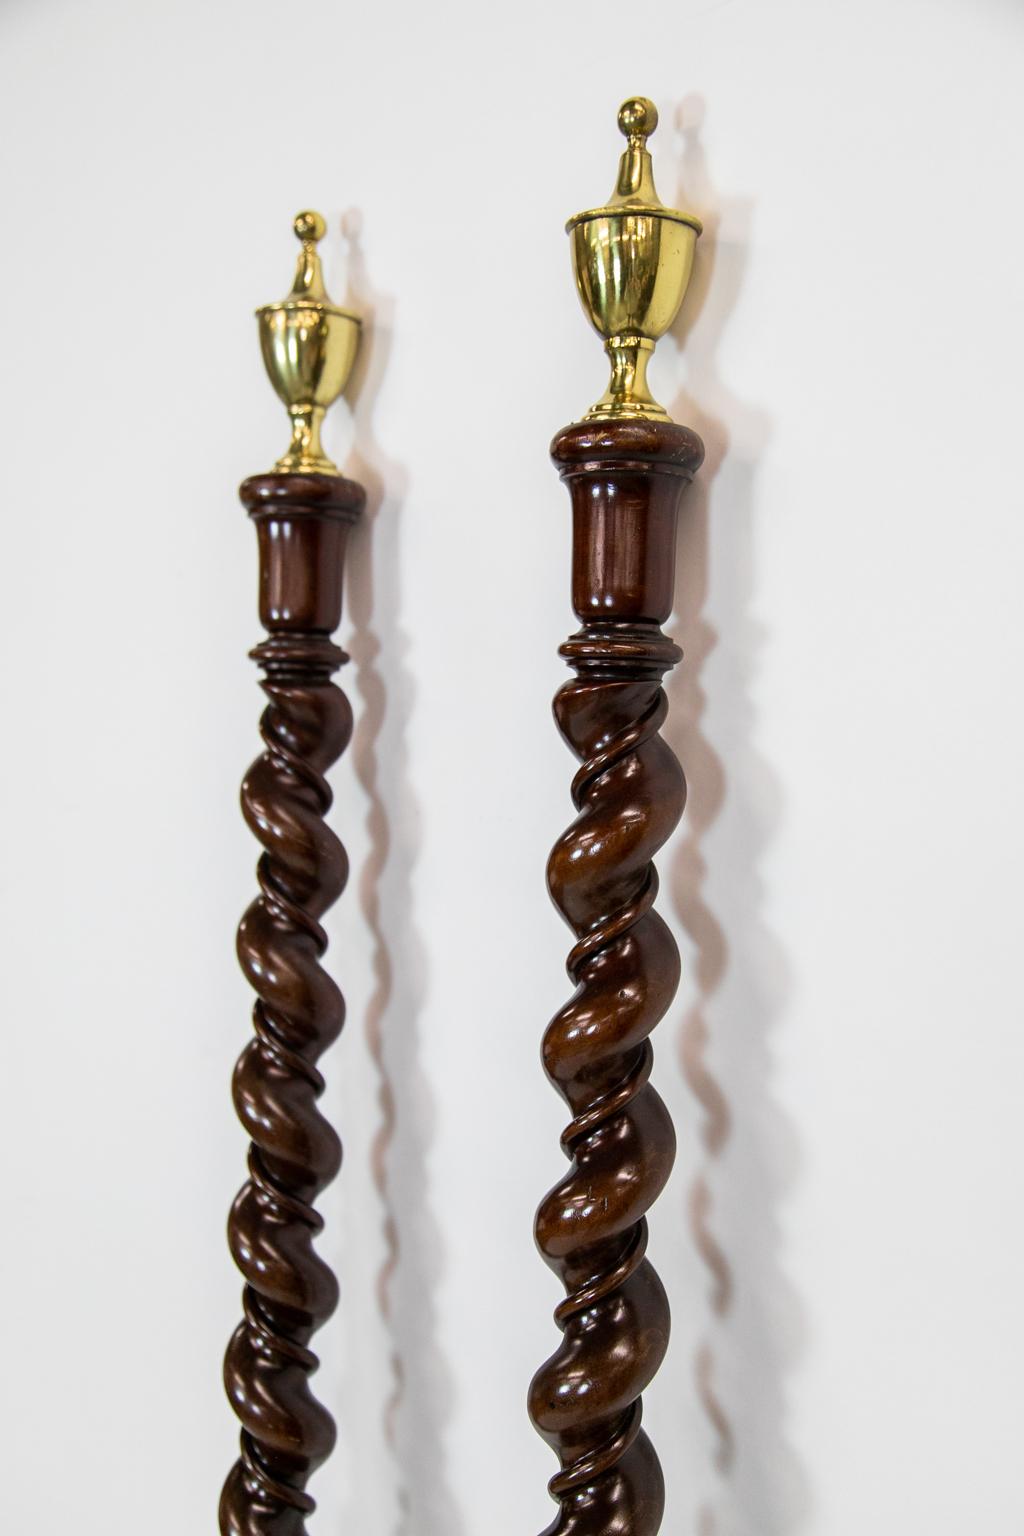 This pair of columns has brass classical urn finials. They have a graduated diameter from top to bottom. The barley twist stem has a continuous carved vine that spirals from top to bottom inside the barley twist. These columns were at some time